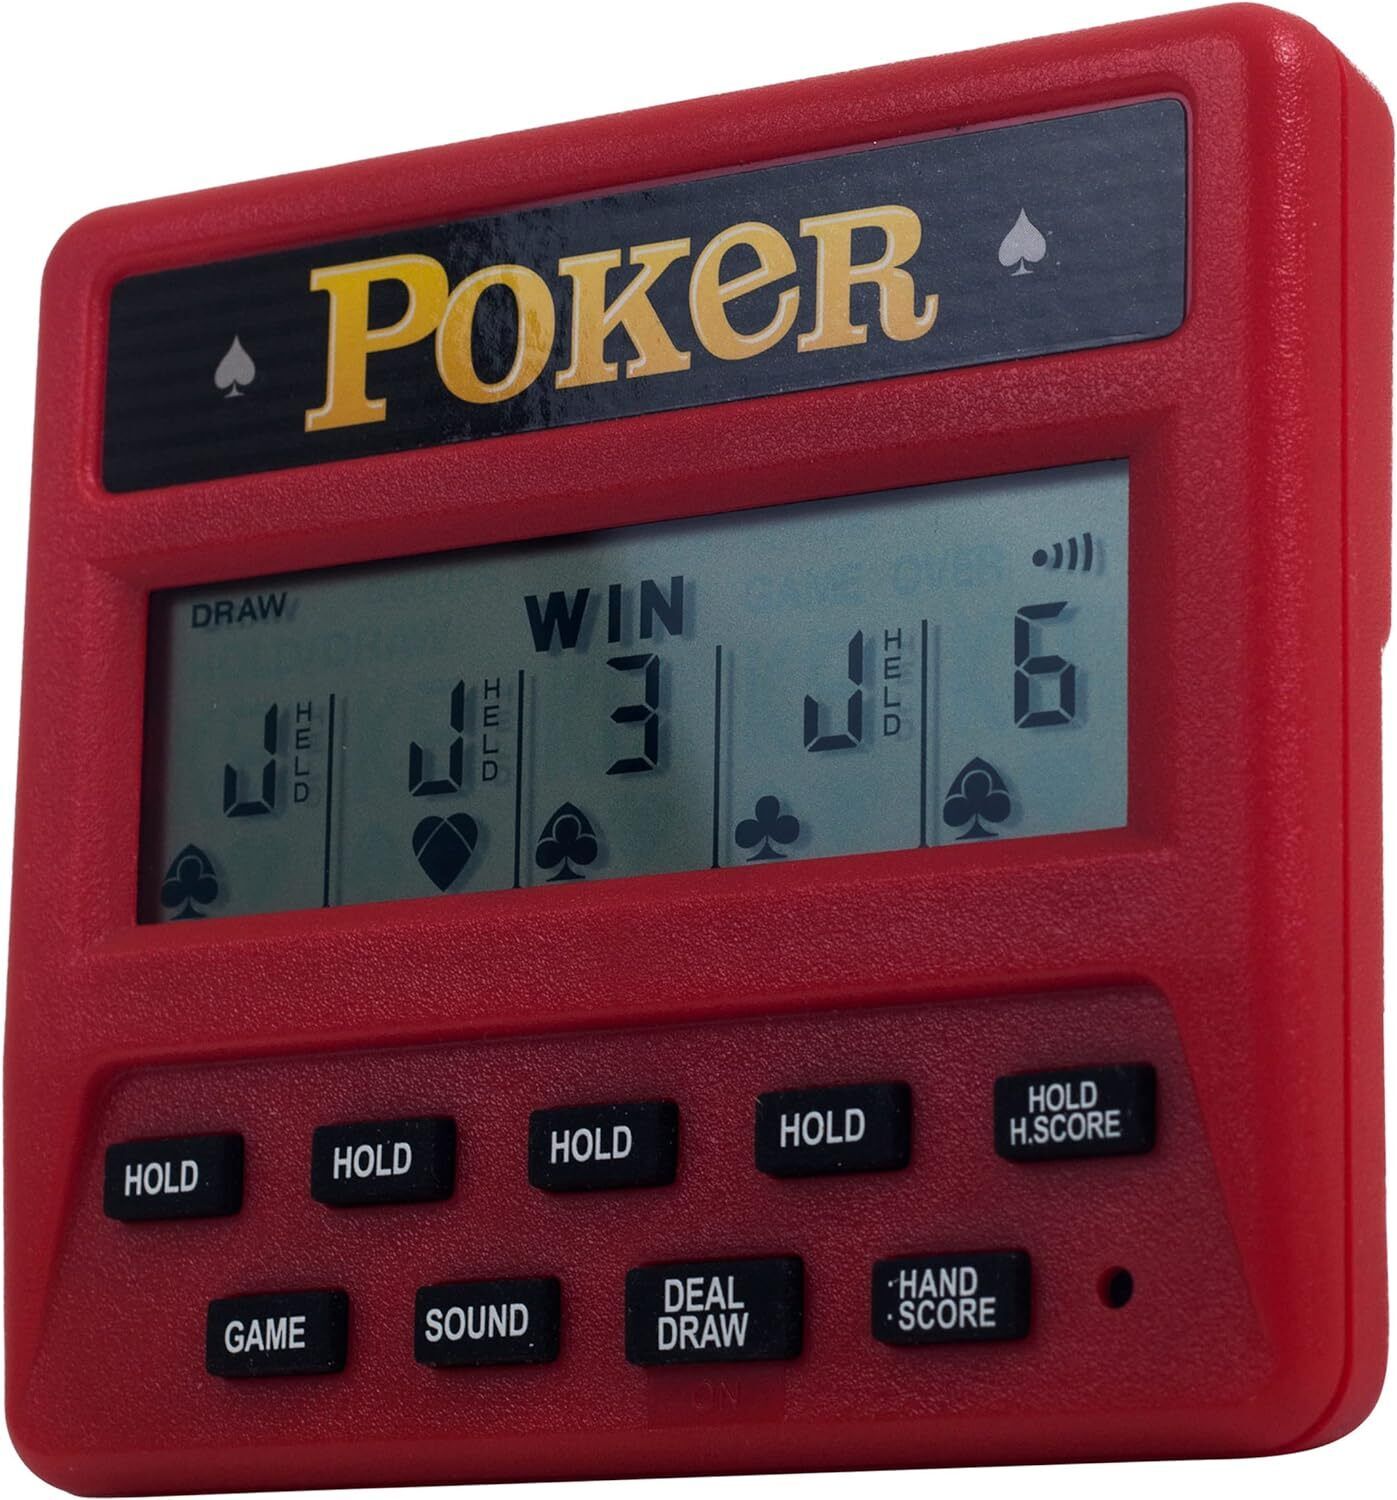 Trademark Poker 5-in-1 Poker Game – Electronic Handheld Games Including Draw,